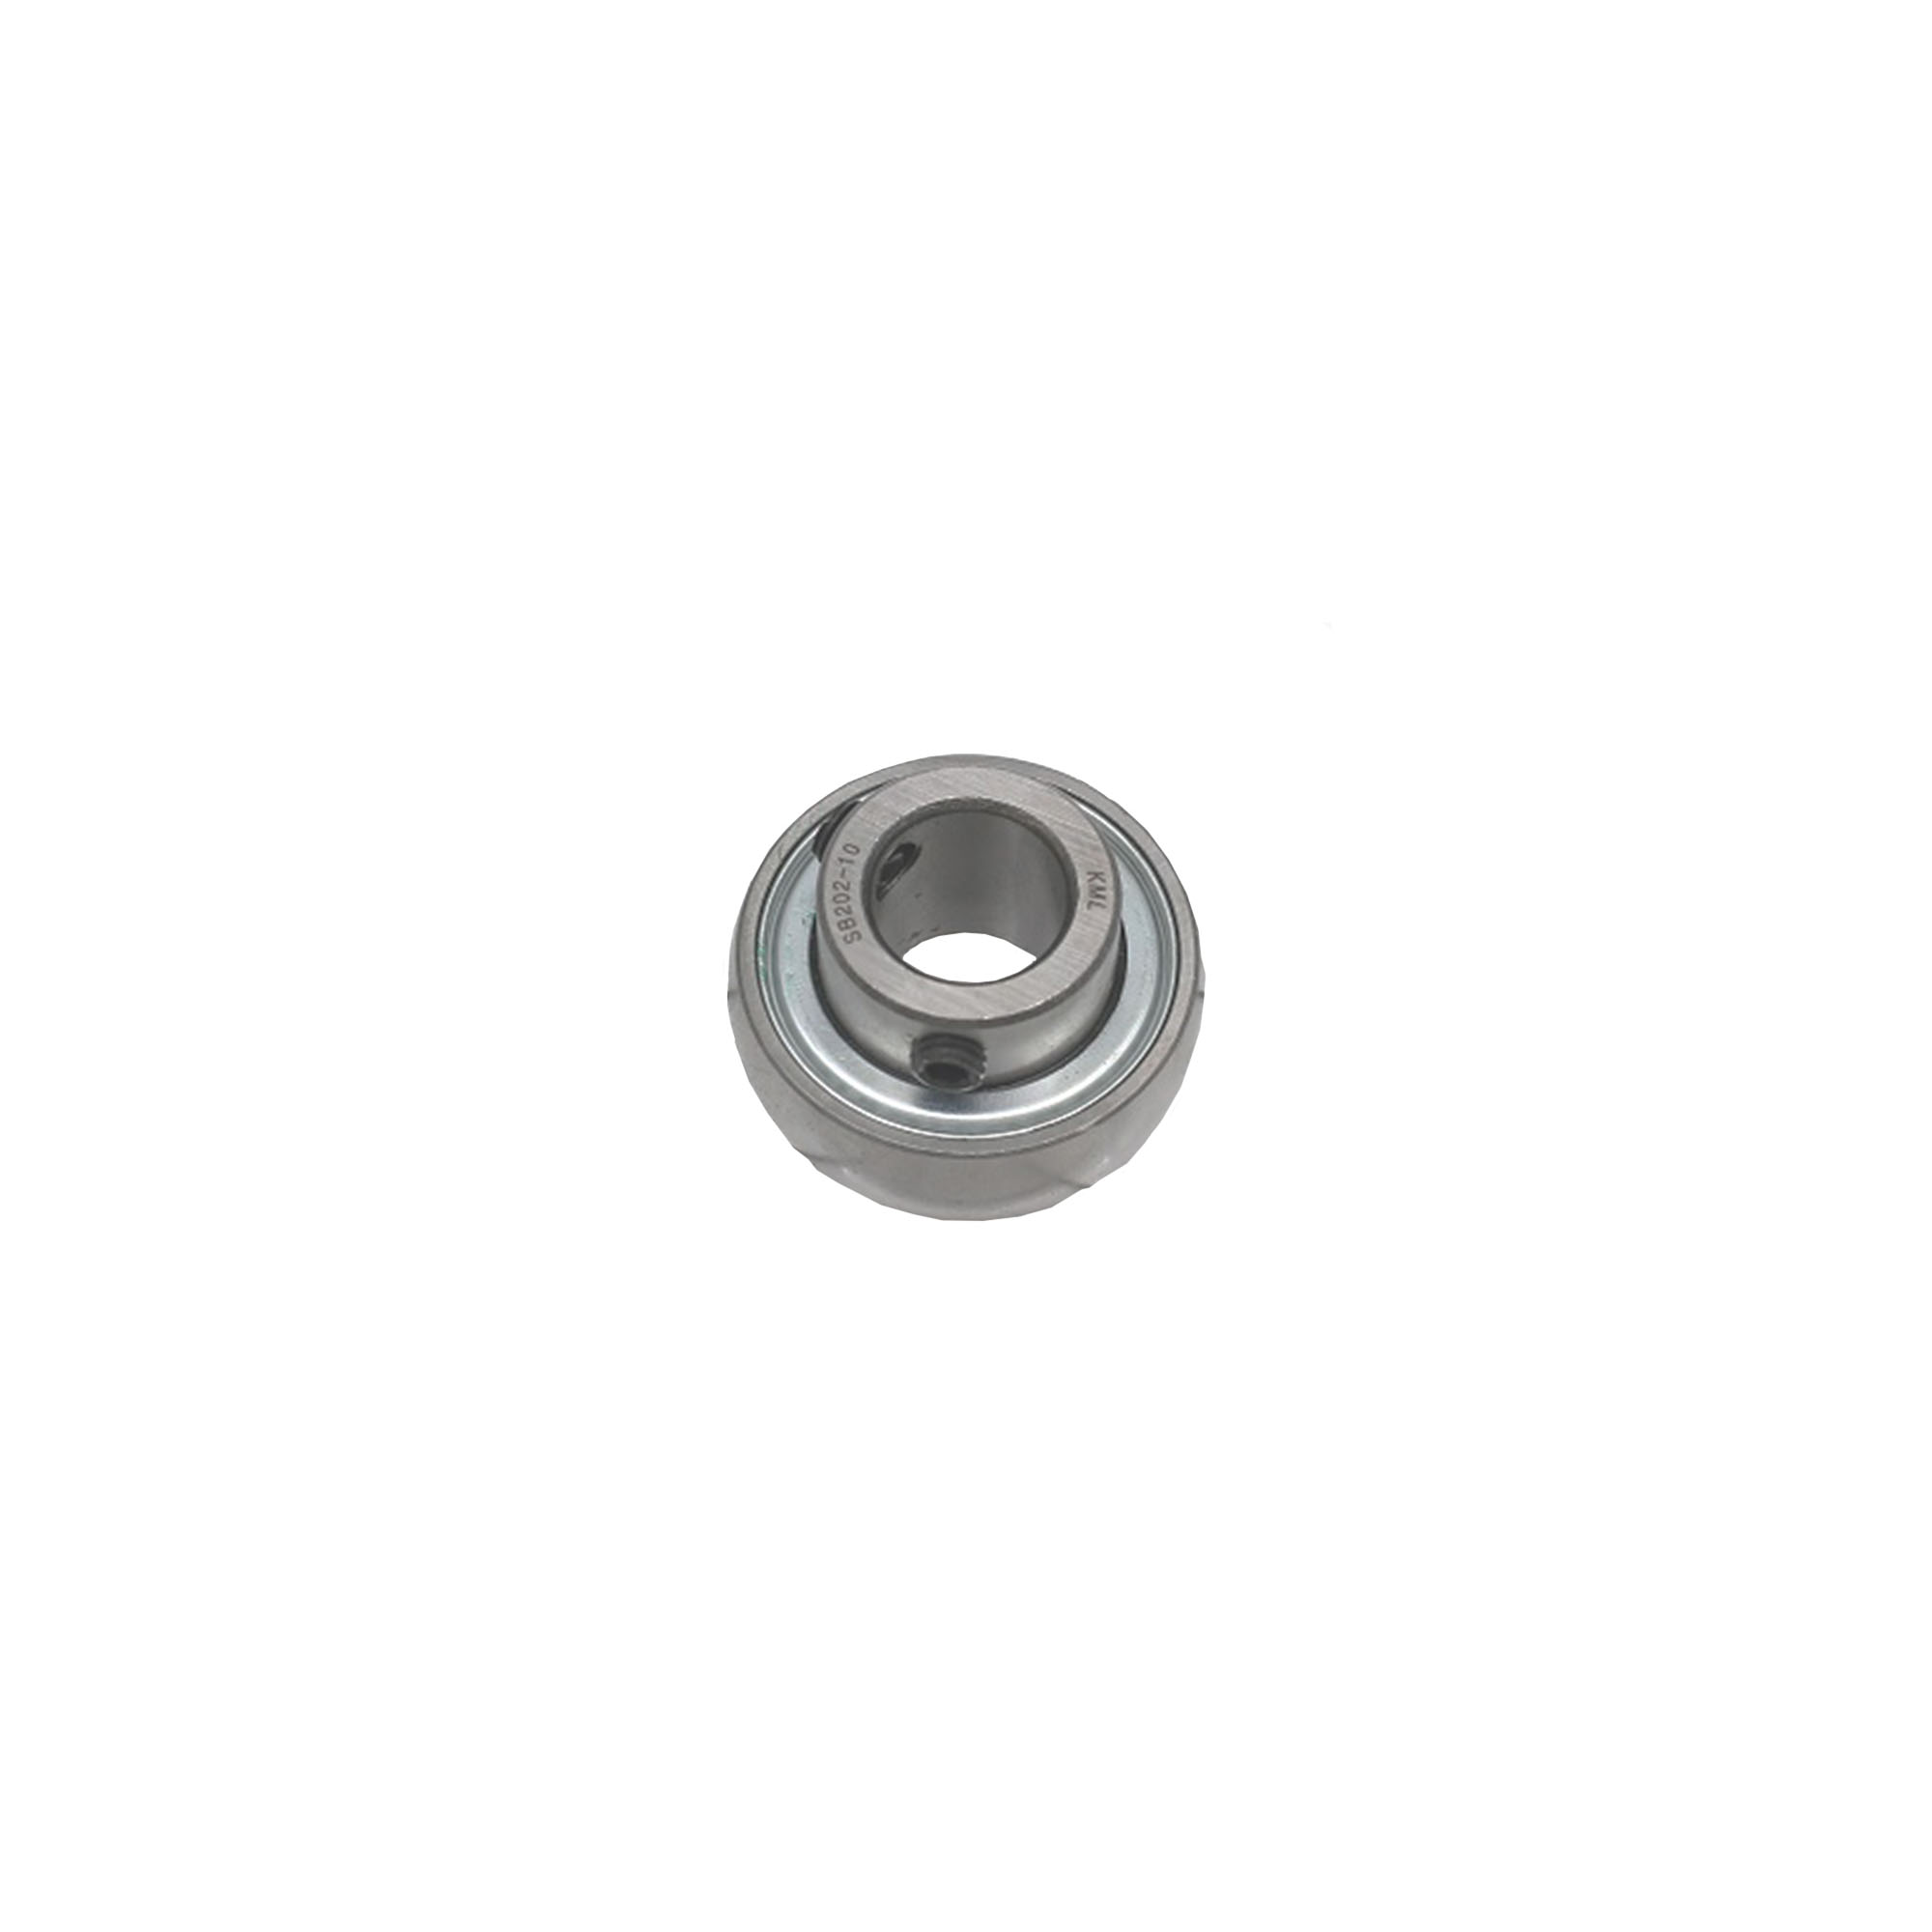 Parts Washer Replacement, Parts & Accessories, Bearing for Turntable Motor Shaft, 3602 Bearing, American Hawk Industrial, Dee-Blast